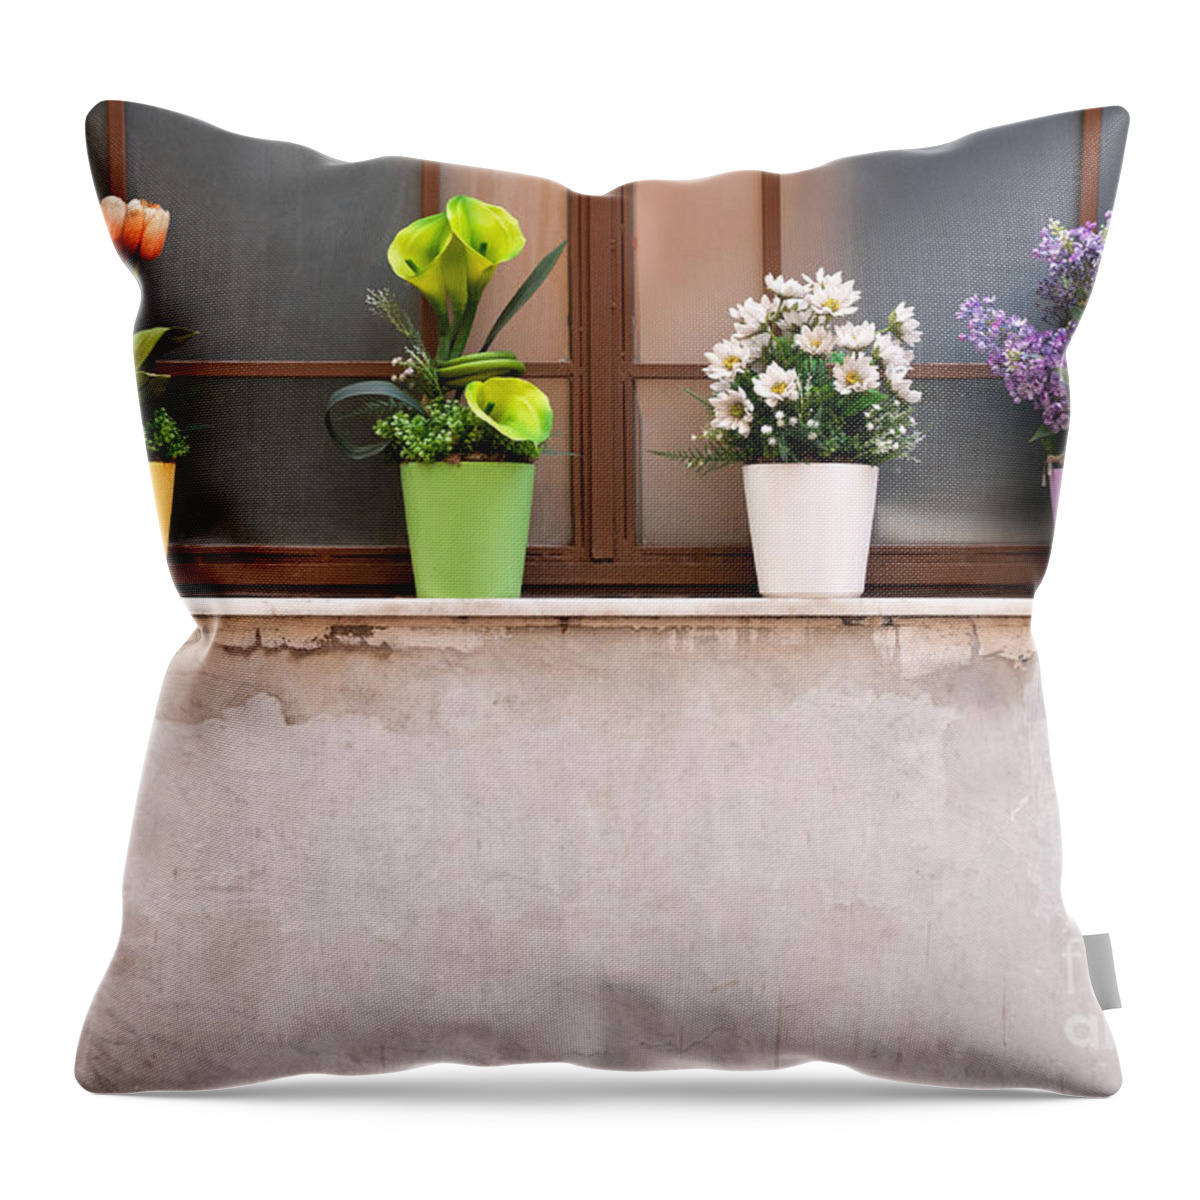 Istanbul Throw Pillow featuring the photograph Potted Flowers 01 by Rick Piper Photography